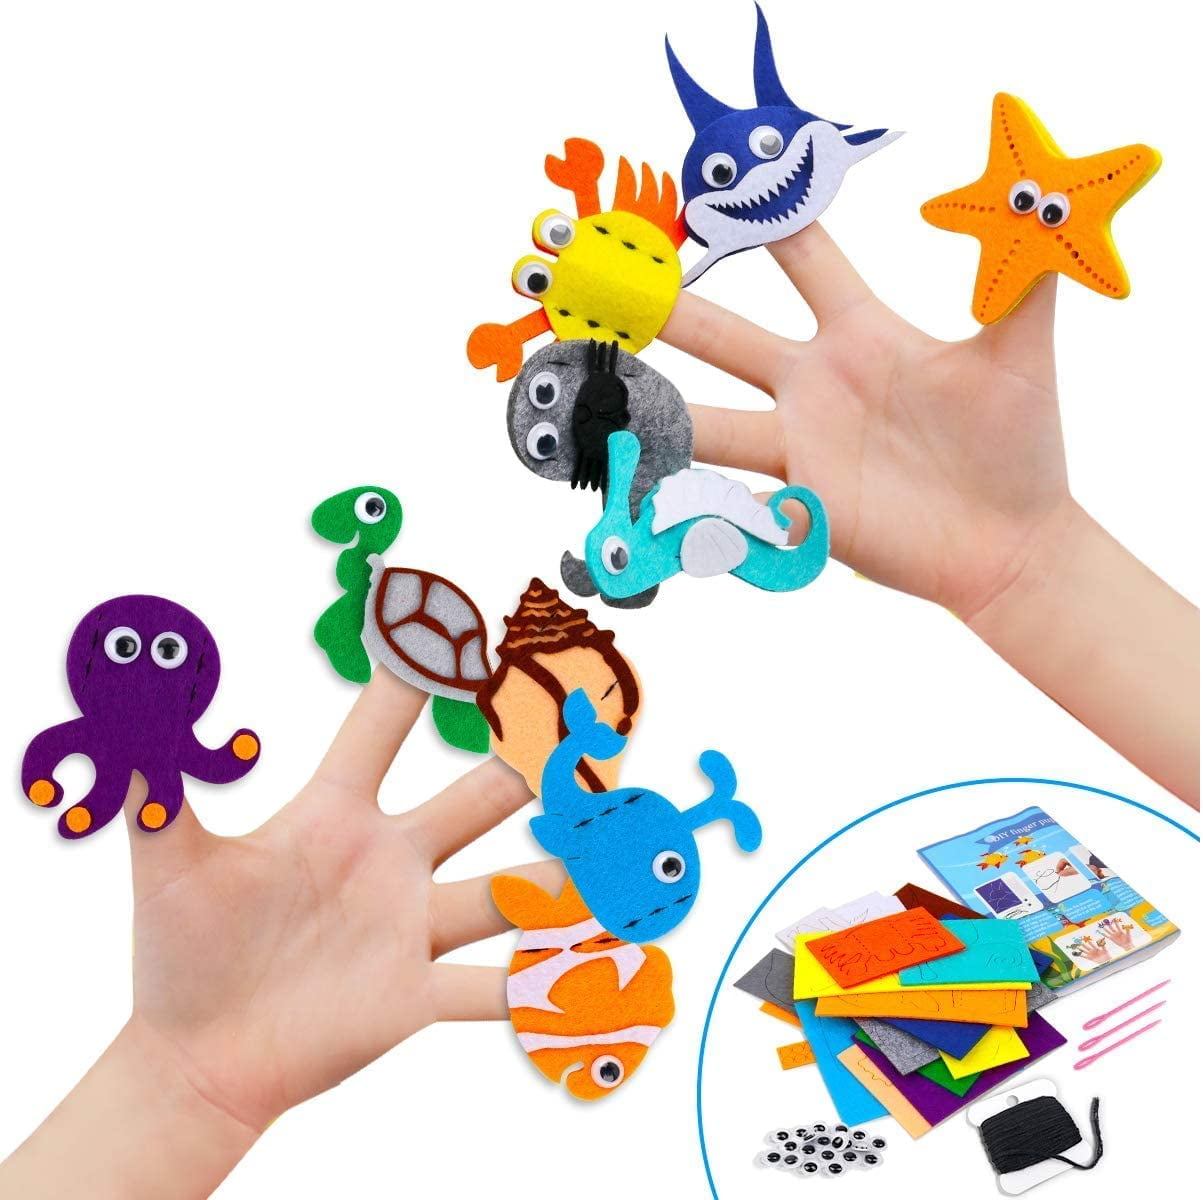 Hapeisy Hand Puppet Making Kit for Kids Art Craft Felt Sock Puppet Creative  DIY Felt Hand Puppet Making Materials Kit Lovely Animals Theater Craft  Fabric Story Telling Gloves Role Play 